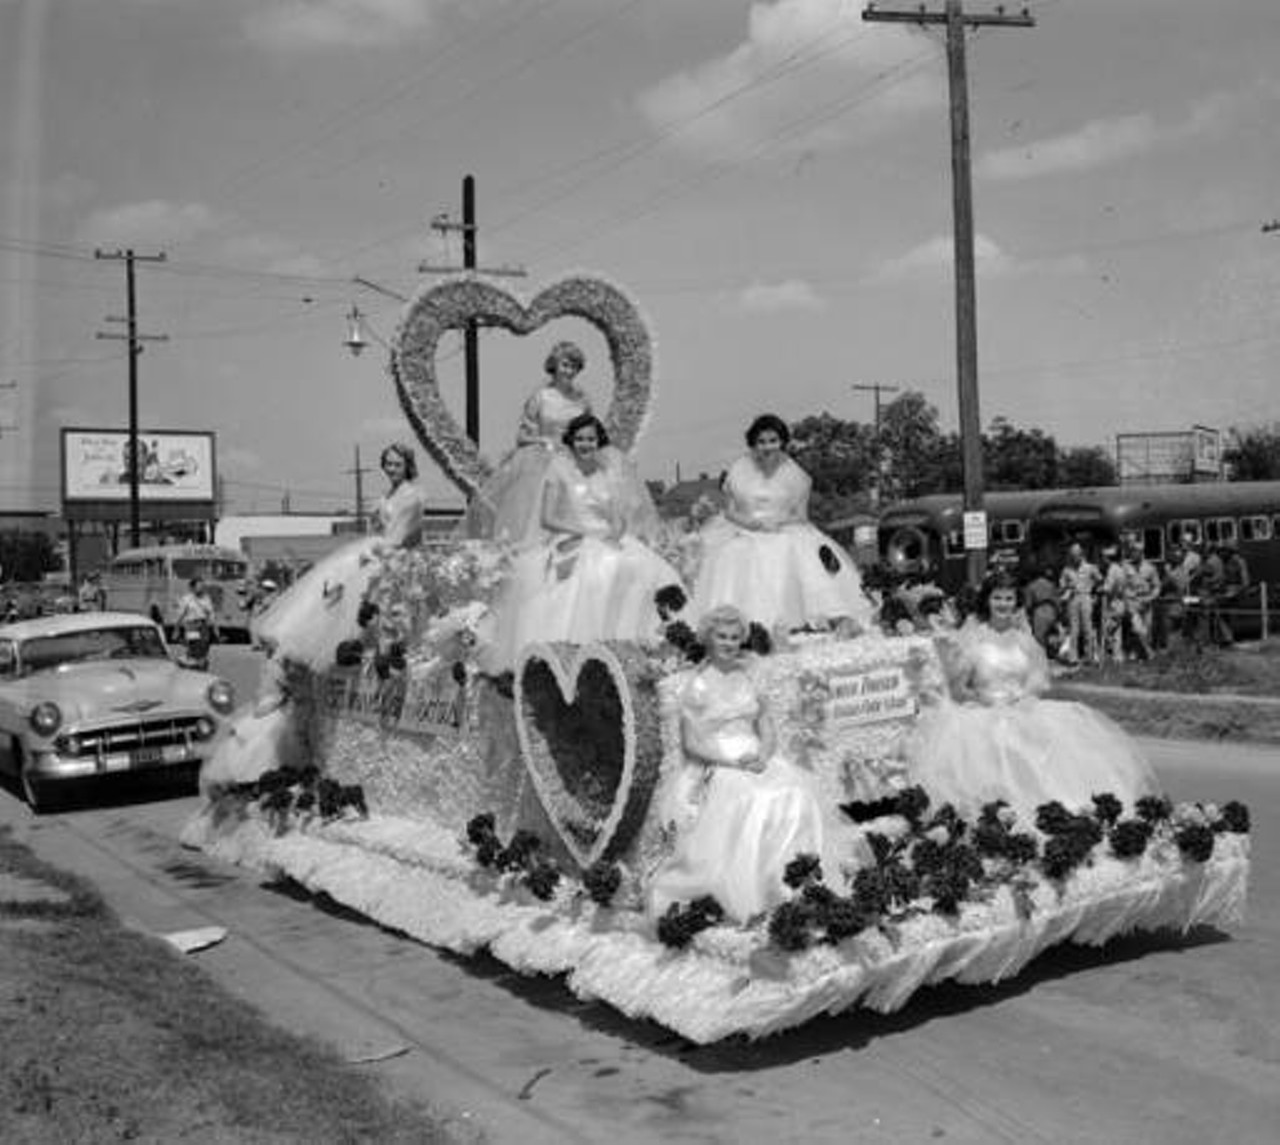 Fiesta Flambeau: Junior Division Public Schools Float, 1954
Fiesta Flambeau, which is part of the eleven days of Fiesta San Antonio, started off as an idea by Reynolds Andricks to be a night parade led by torches. The parade has influences of New Orleans Marti Gras, but is uniquely part of San Antonio culture.
Photo via Zintgraff Studio Photo Collection